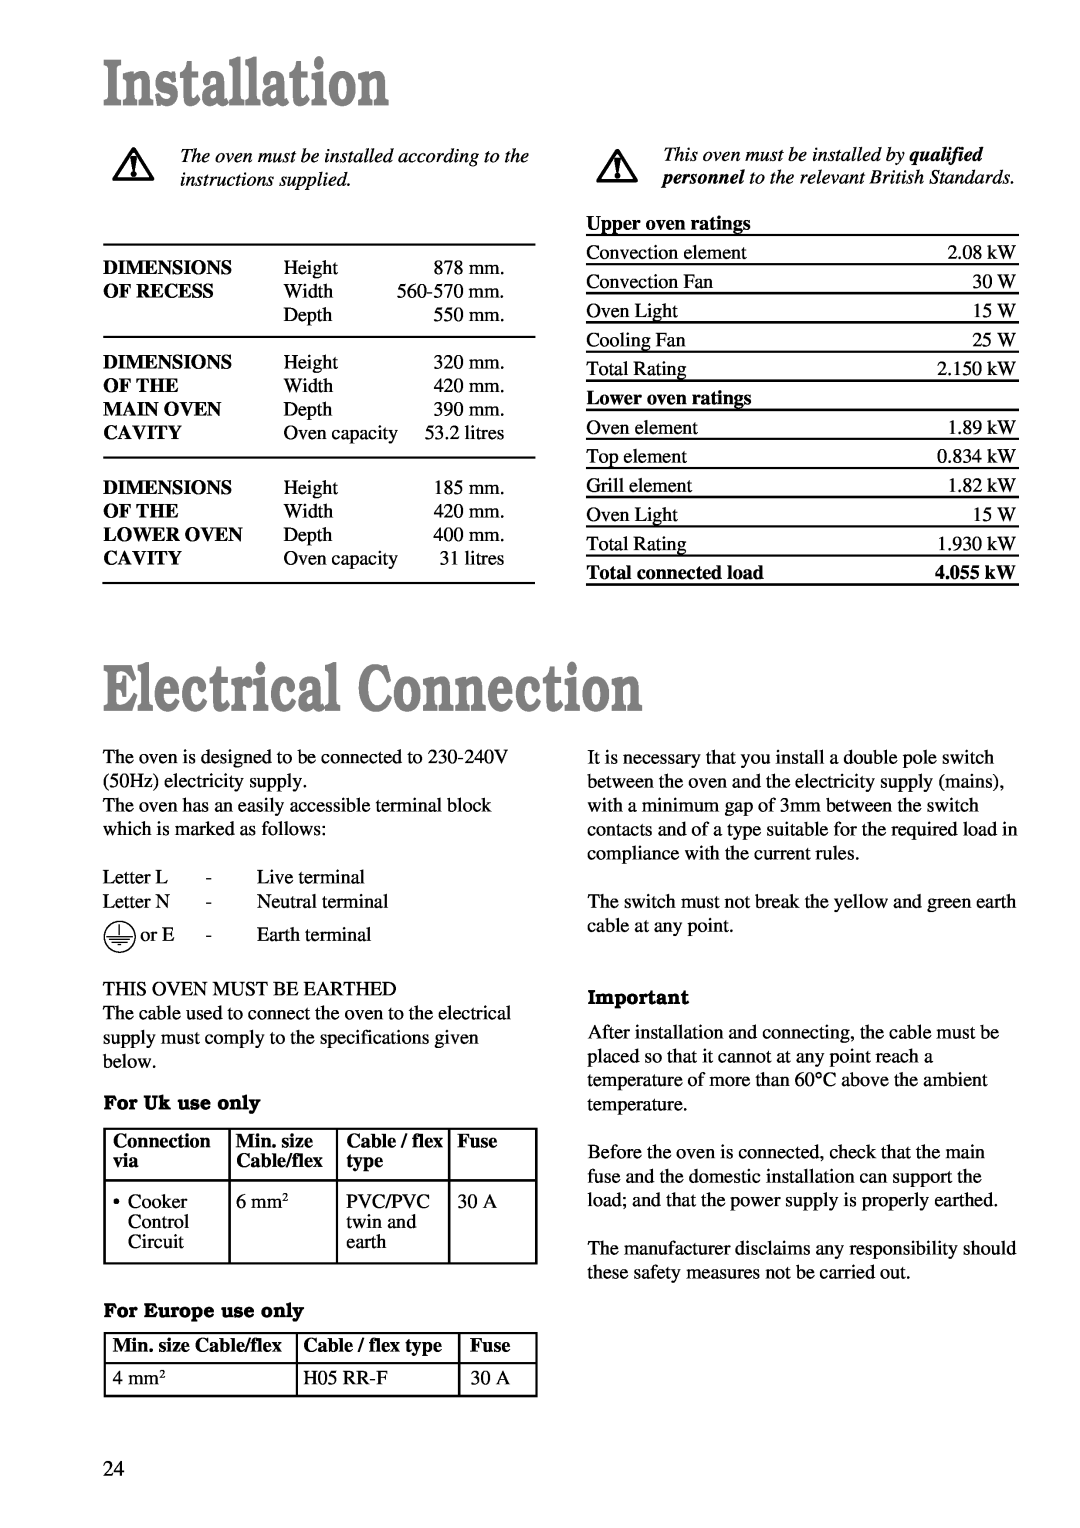 Zanussi ZDF 866 Installation, Electrical Connection, The oven must be installed according to the instructions supplied 